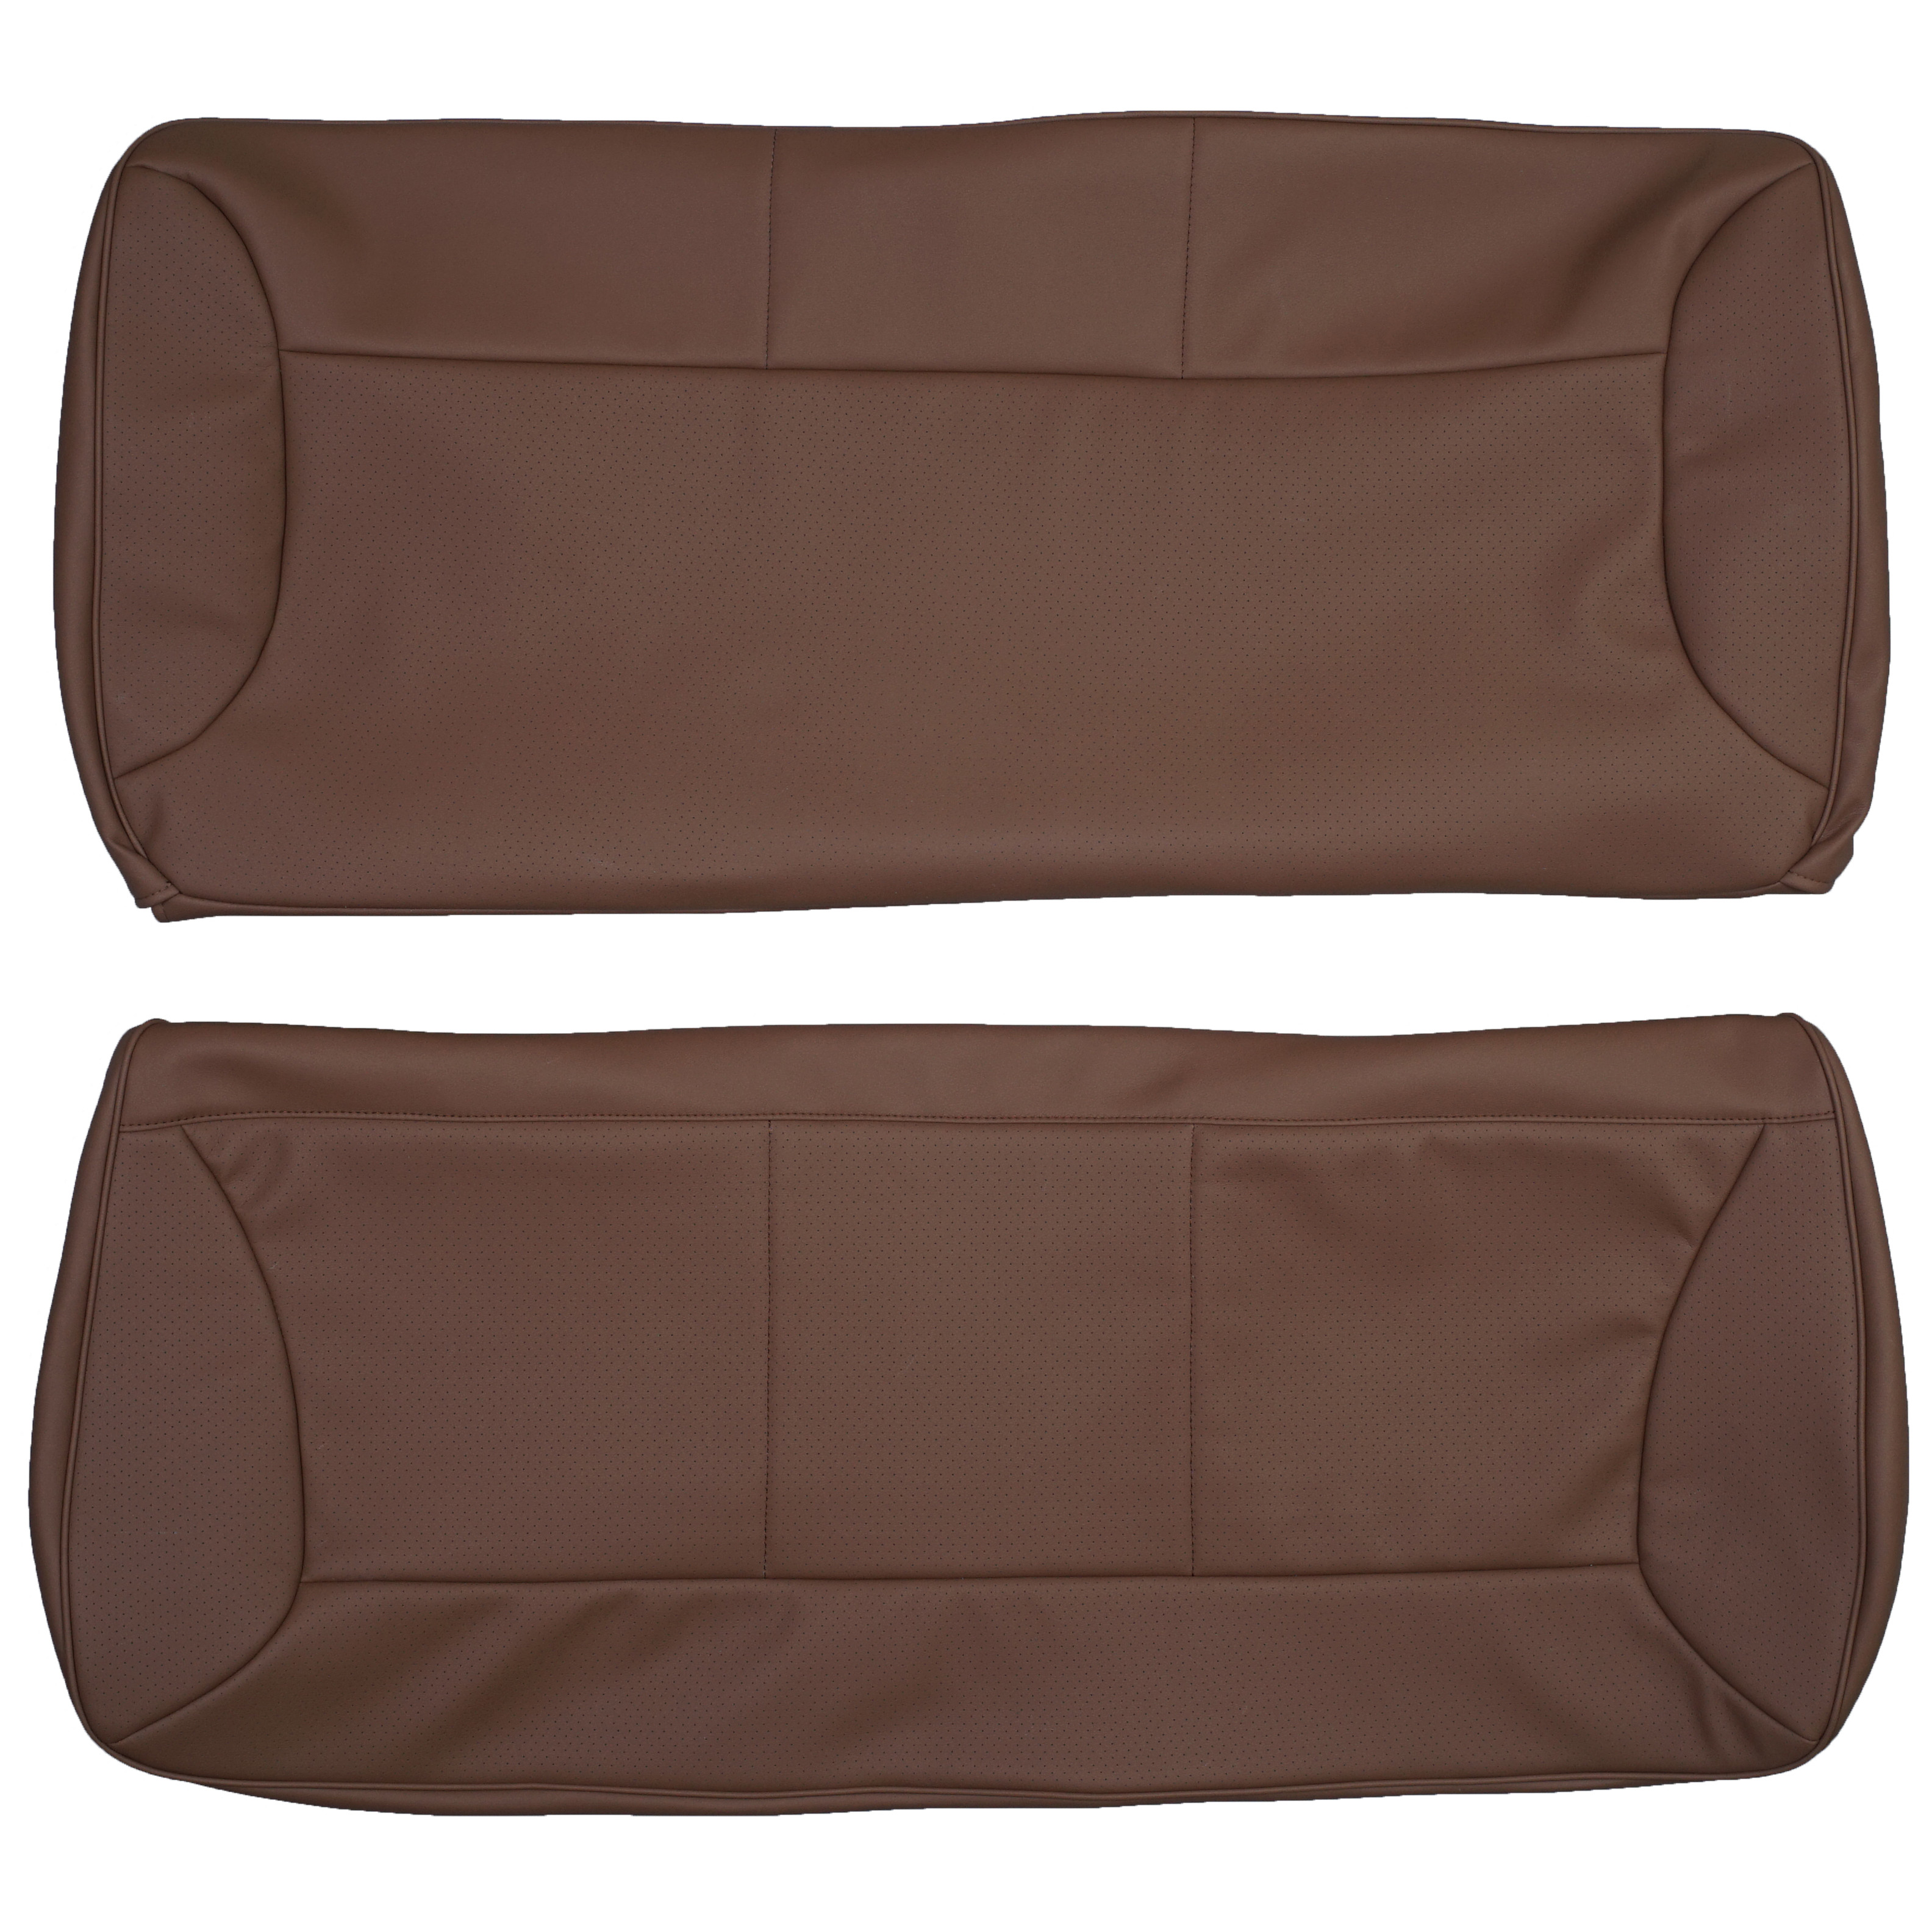 1992-1996 Ford Bronco Eddie Bauer XLT Custom Real Leather Seat Covers  (Rear) - Lseat.com